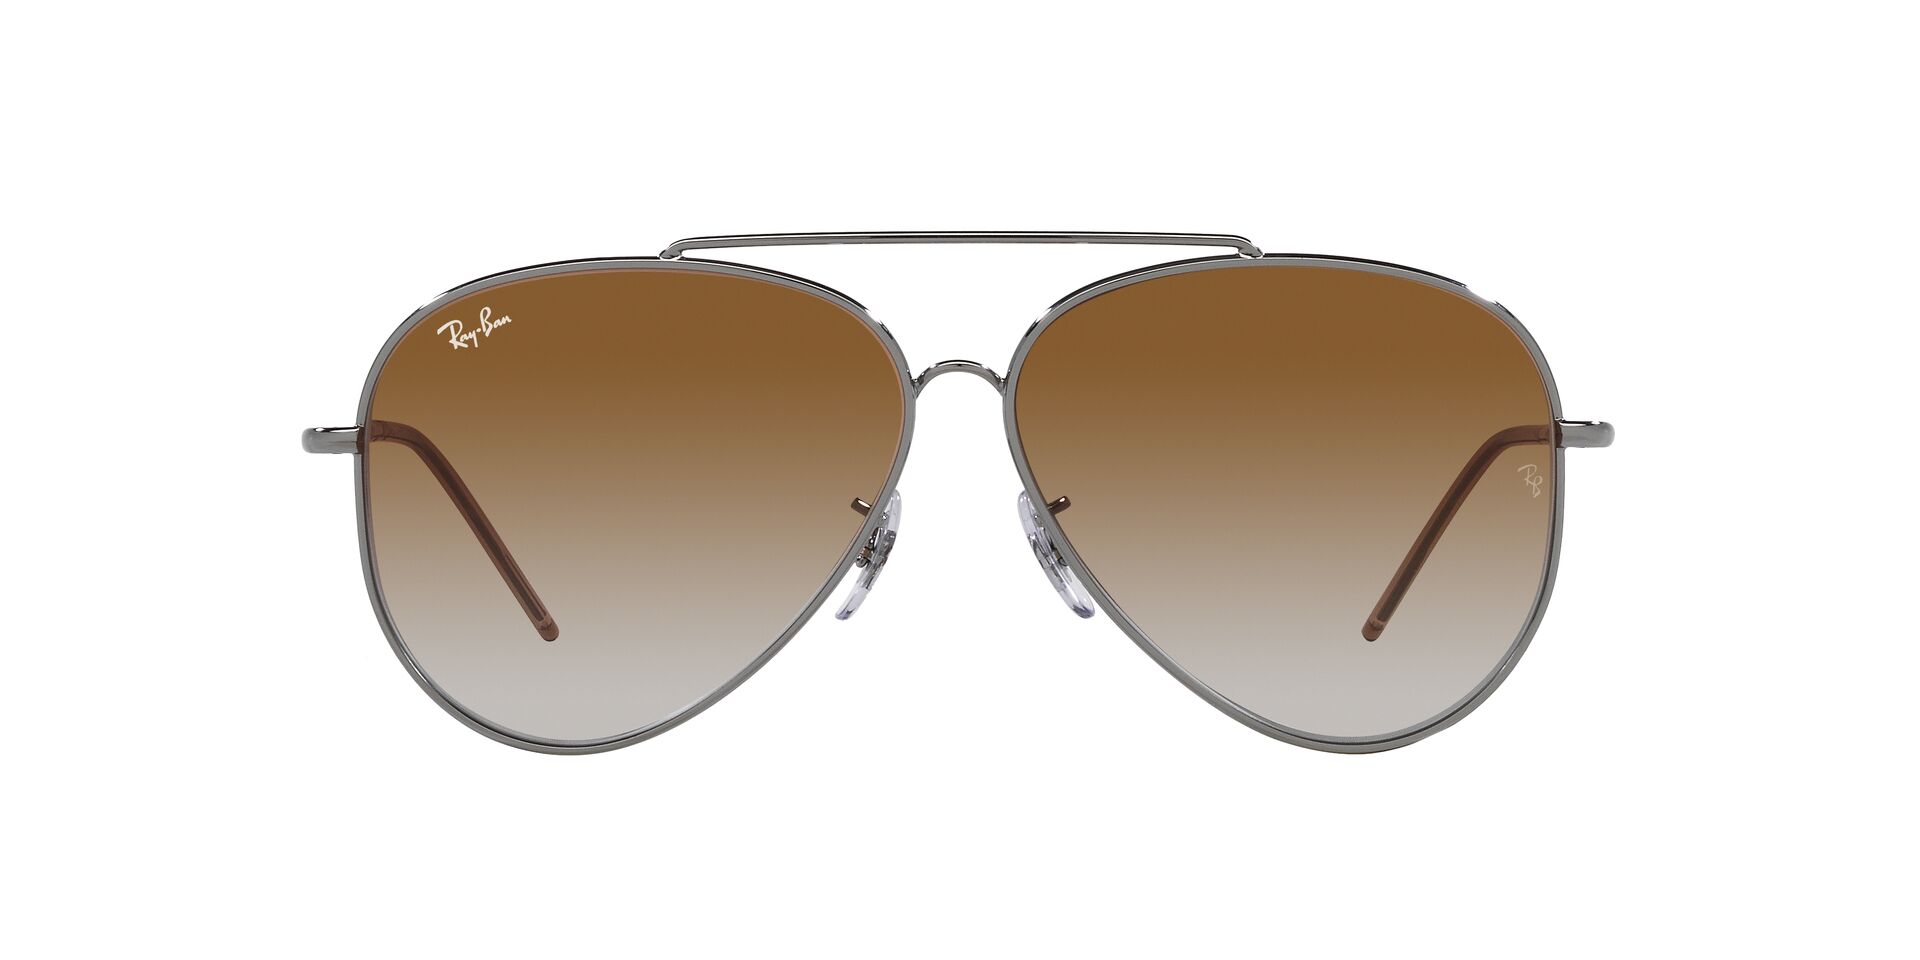 Round Sunglasses Price in India - Buy Round Sunglasses online at Shopsy.in